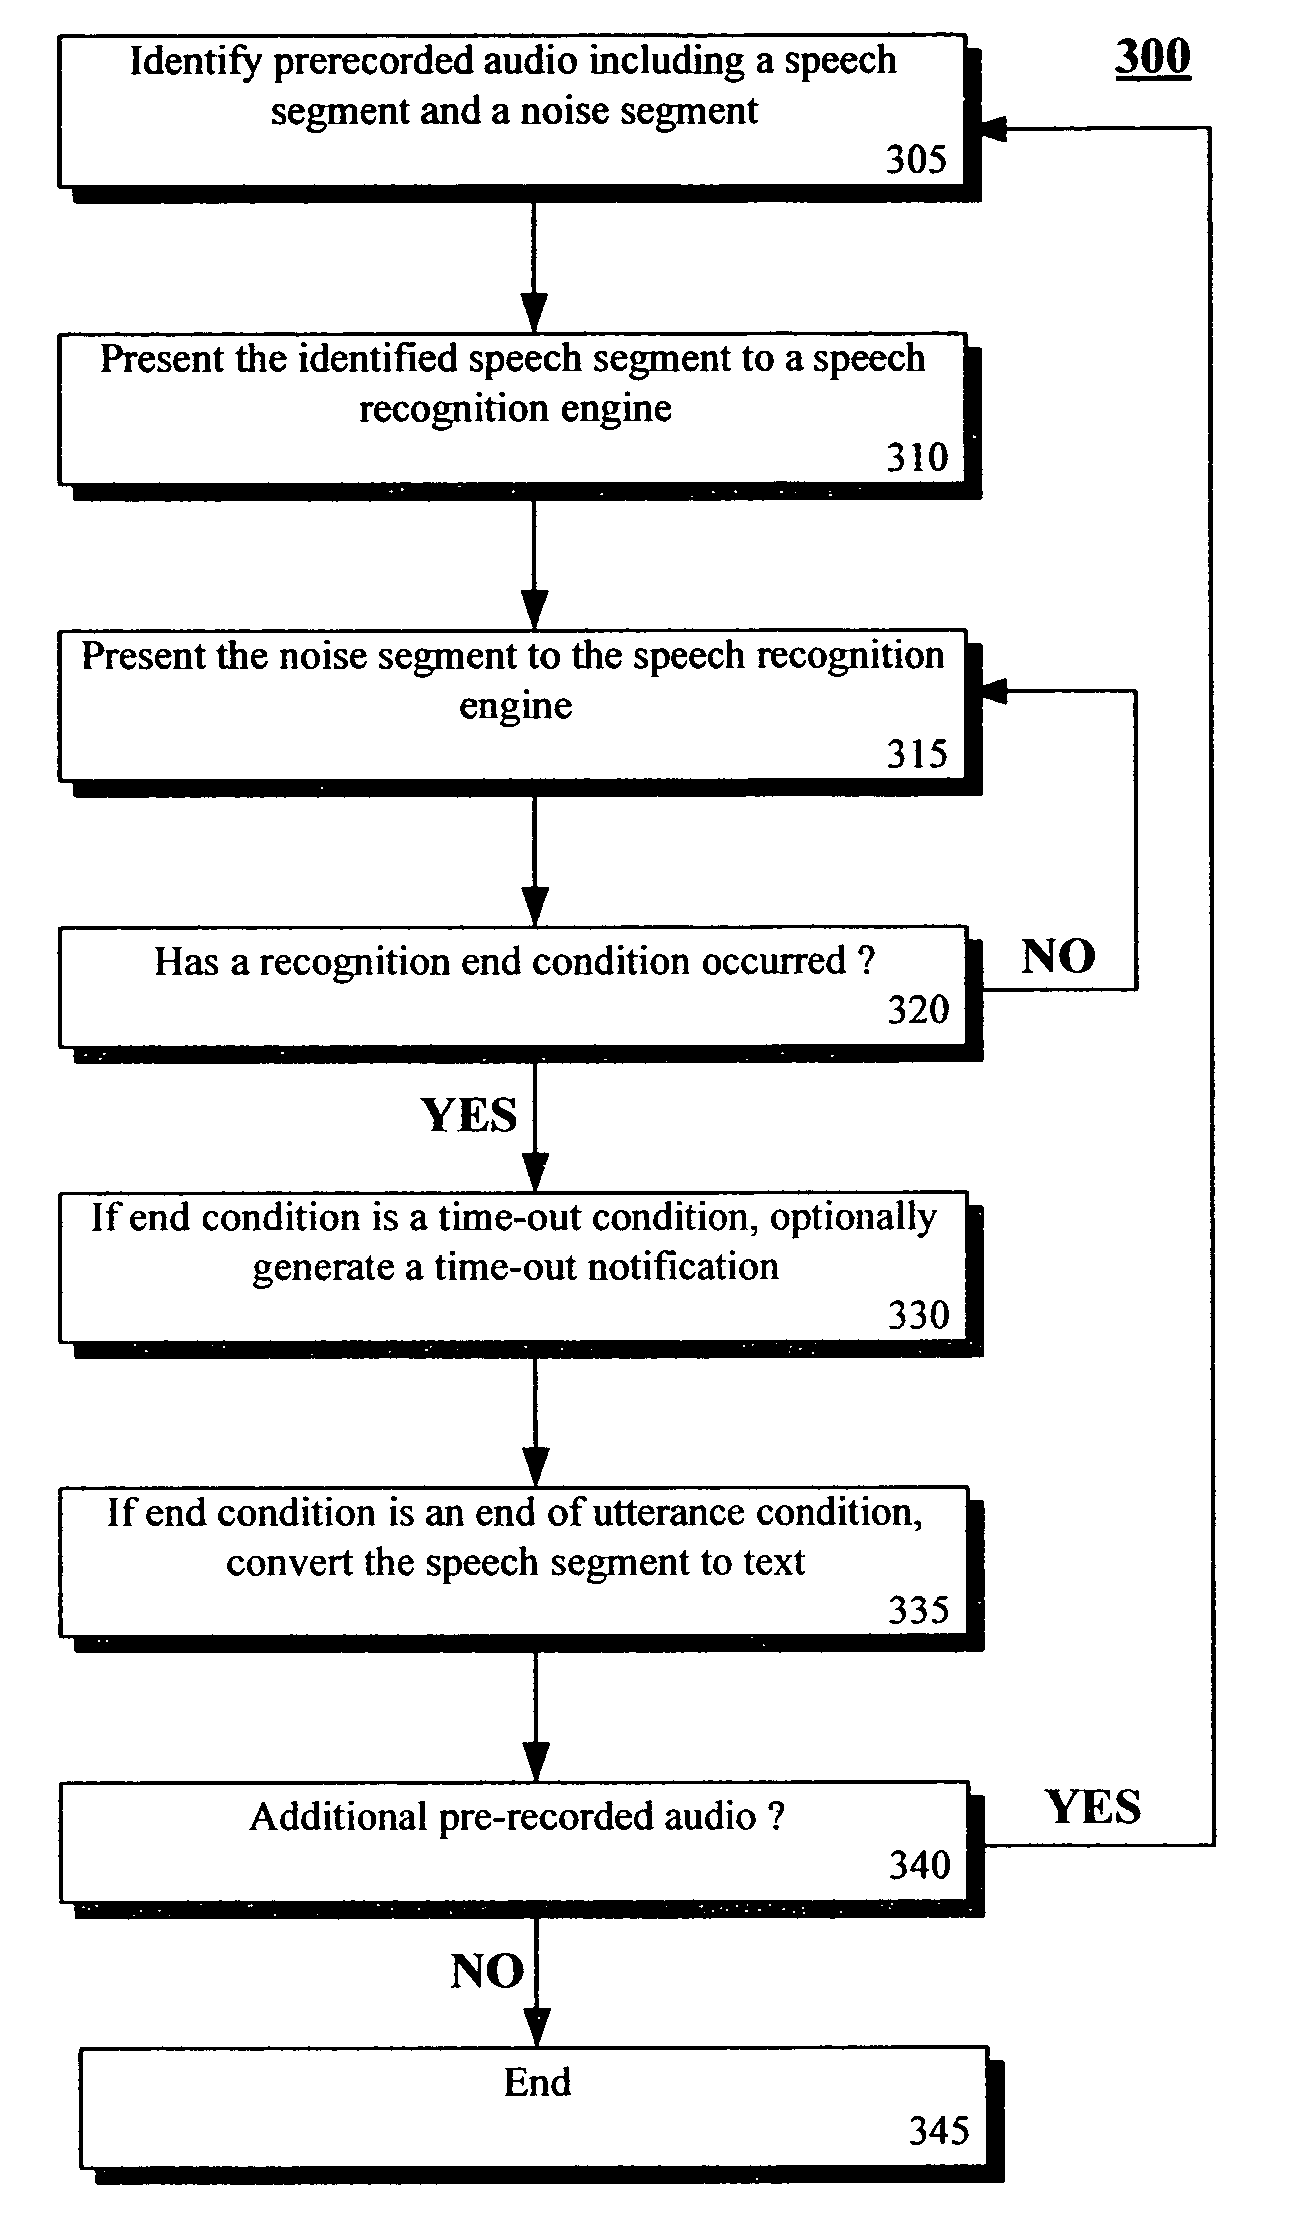 Noise playback enhancement of prerecorded audio for speech recognition operations